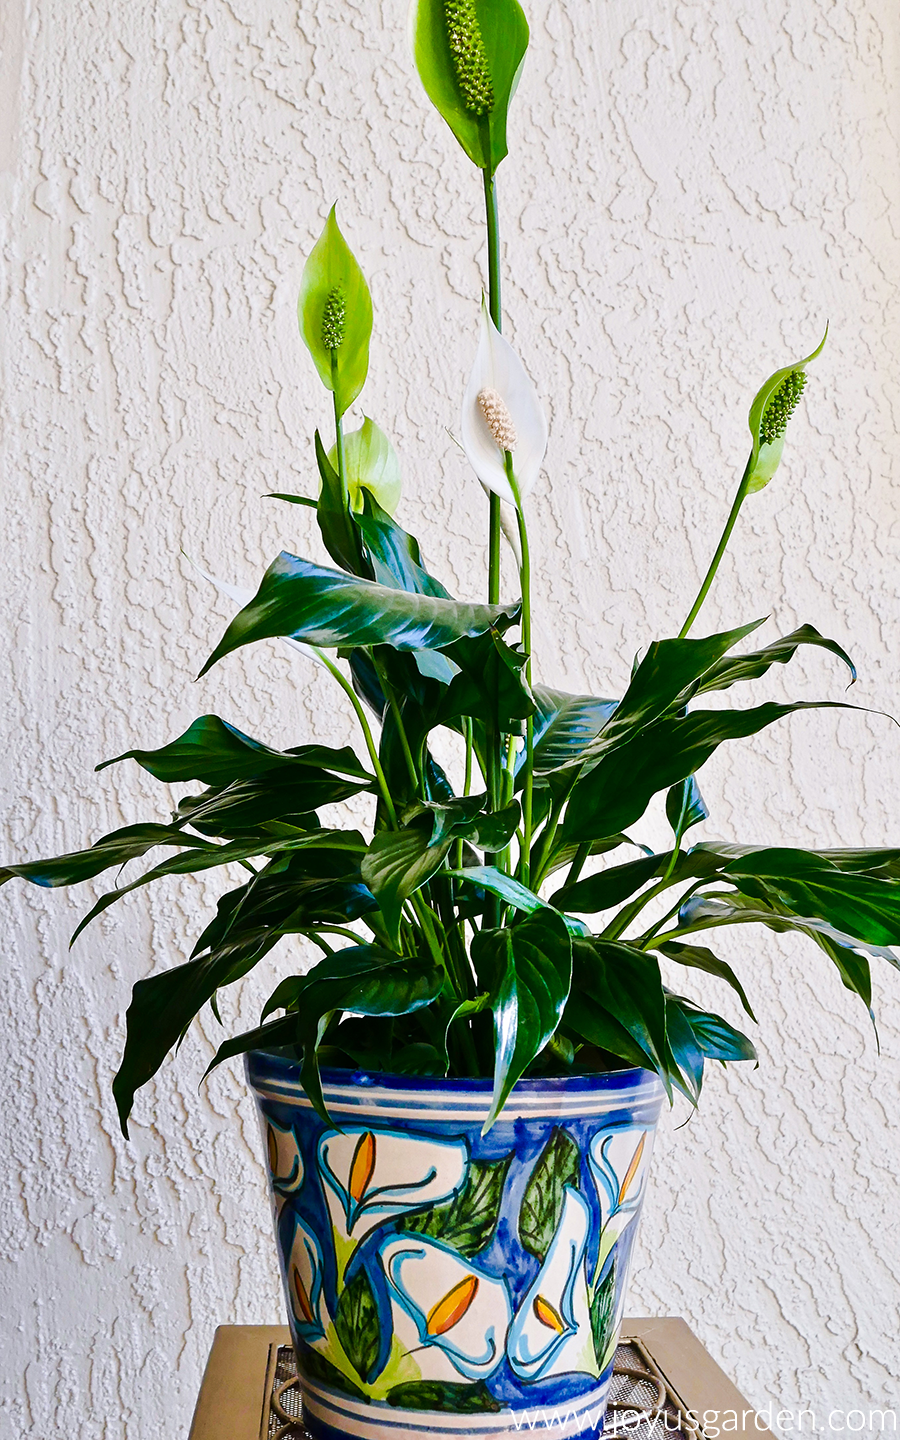 peace lily with white flower bloom displayed in decorated planter pot